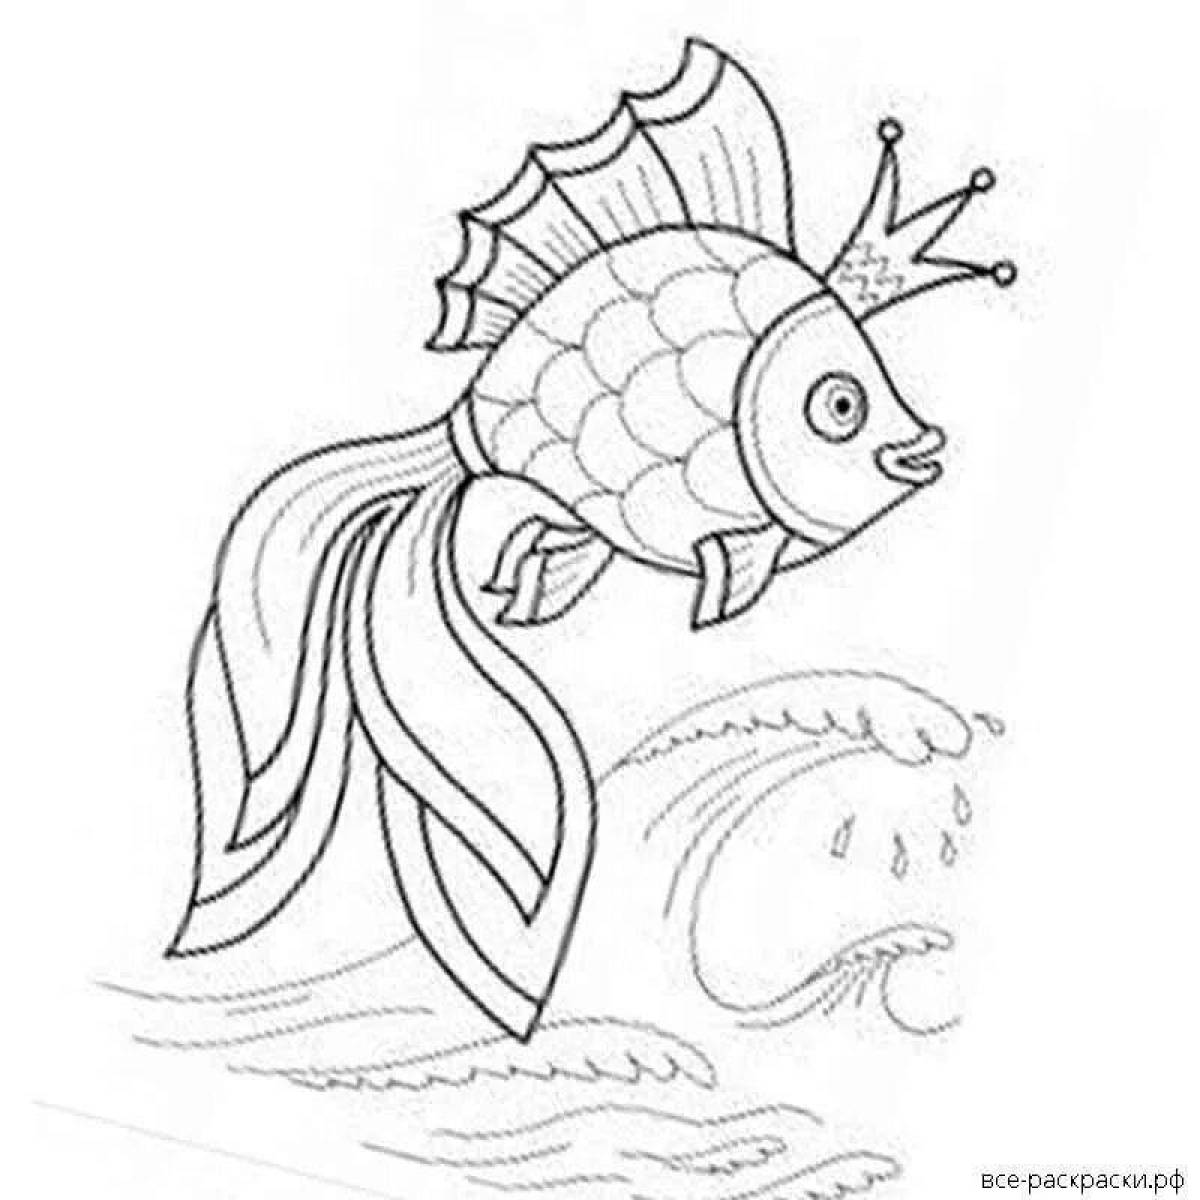 Exquisite goldfish story coloring book